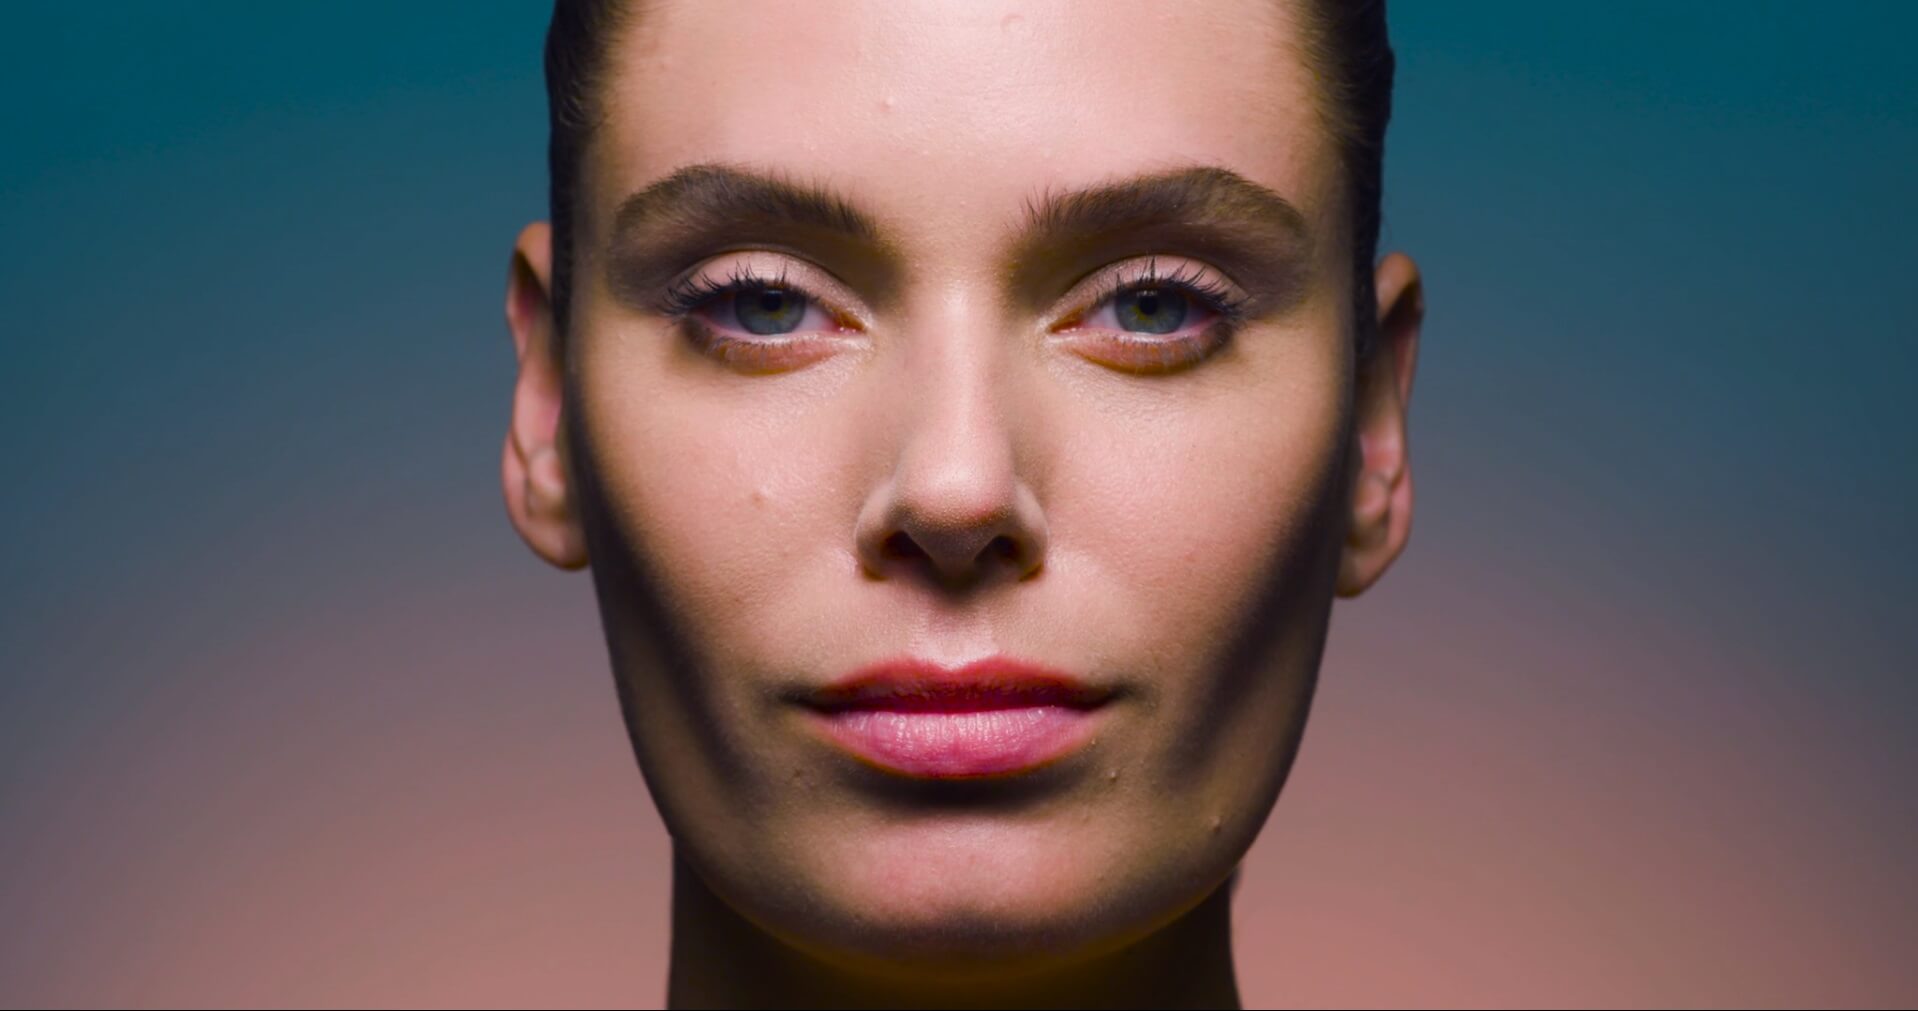 This image shows a female face looking straight in the camera